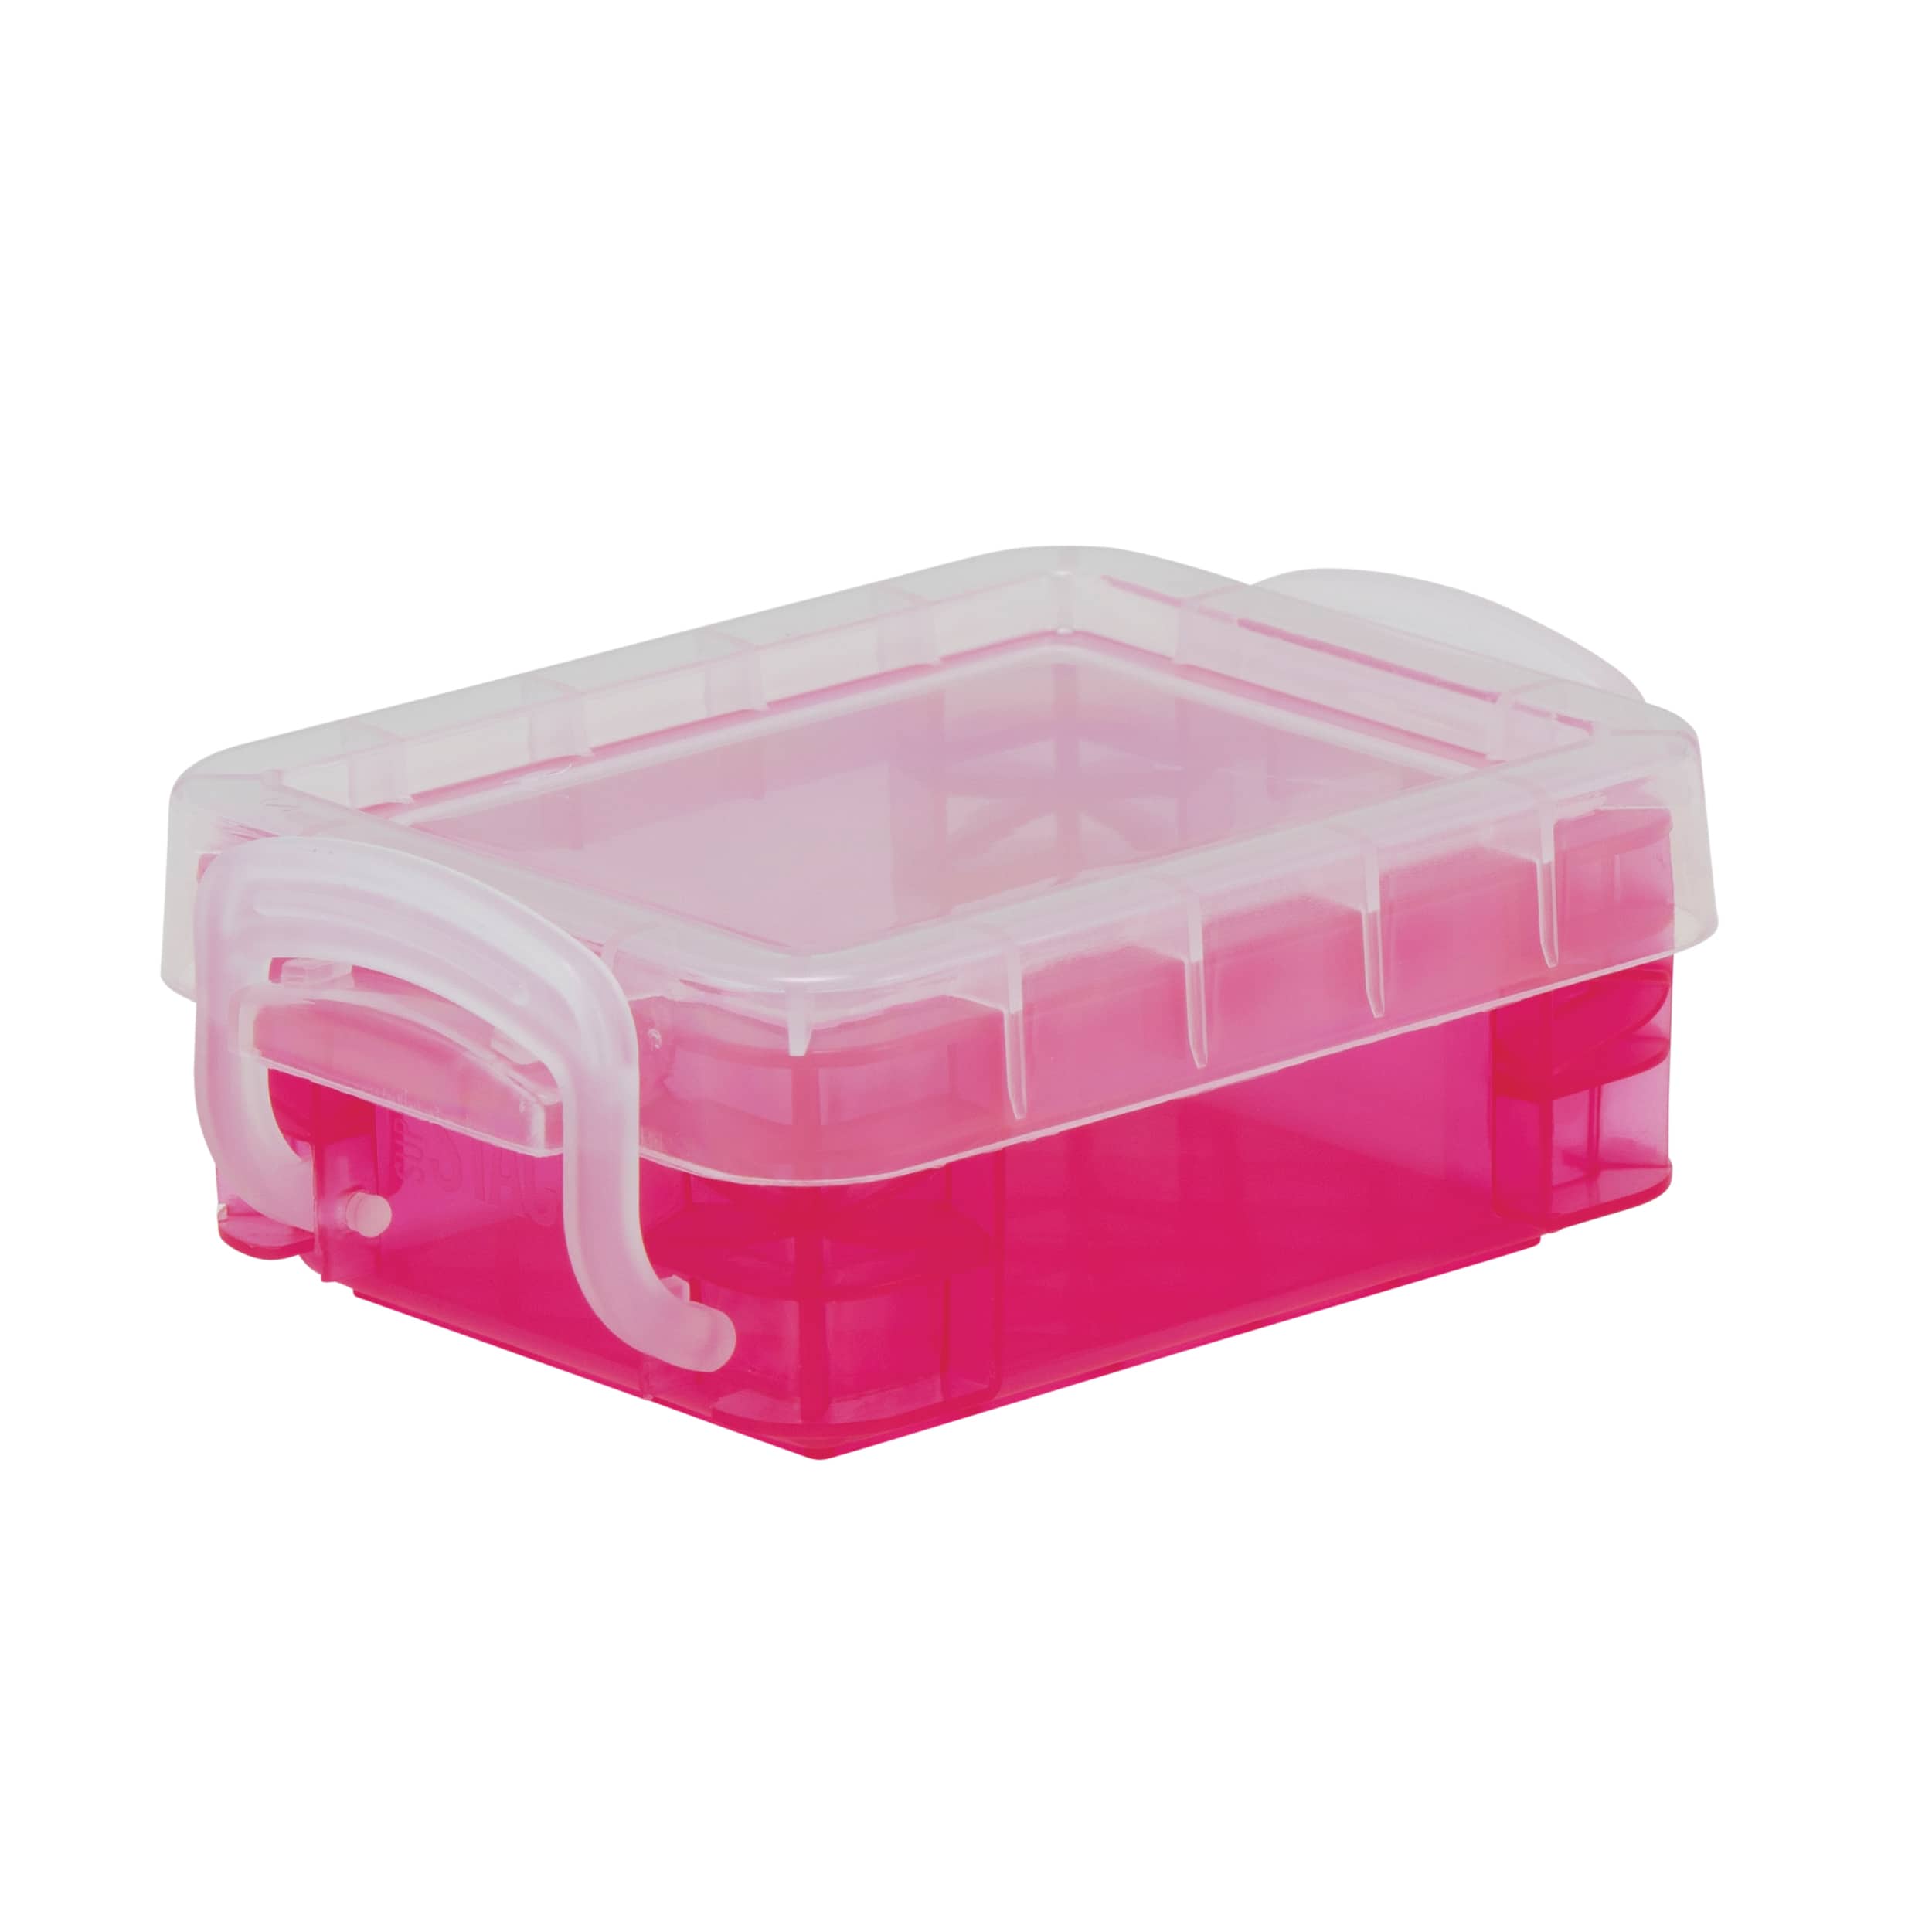 Clear Bitty Boxes by Simply Tidy™, 3ct.